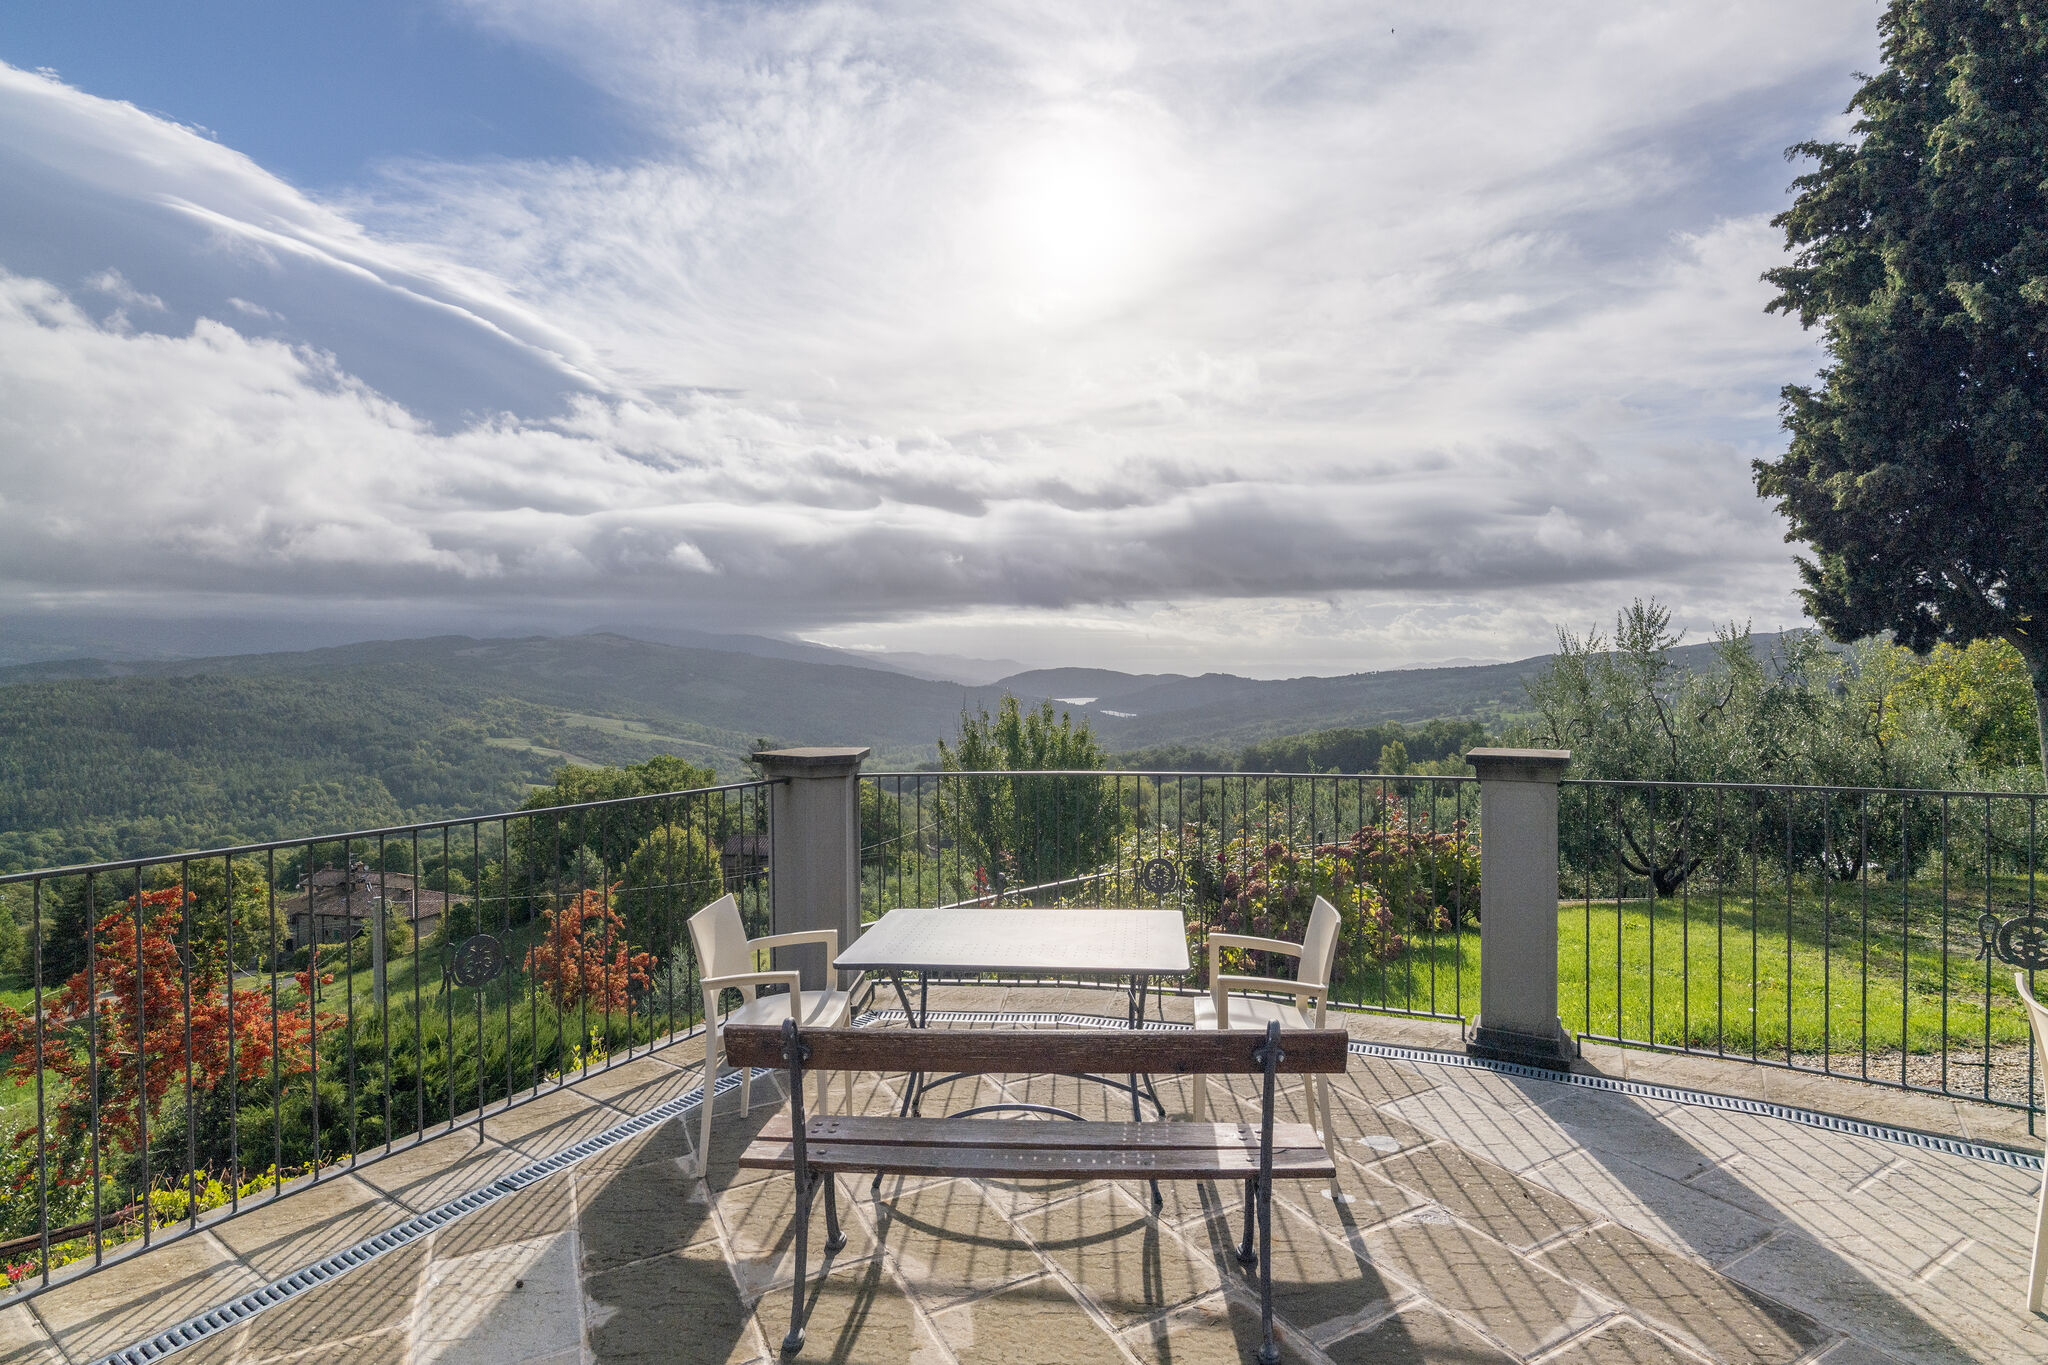 Historical Farmhouse at the foot of the Apennines in Tuscany